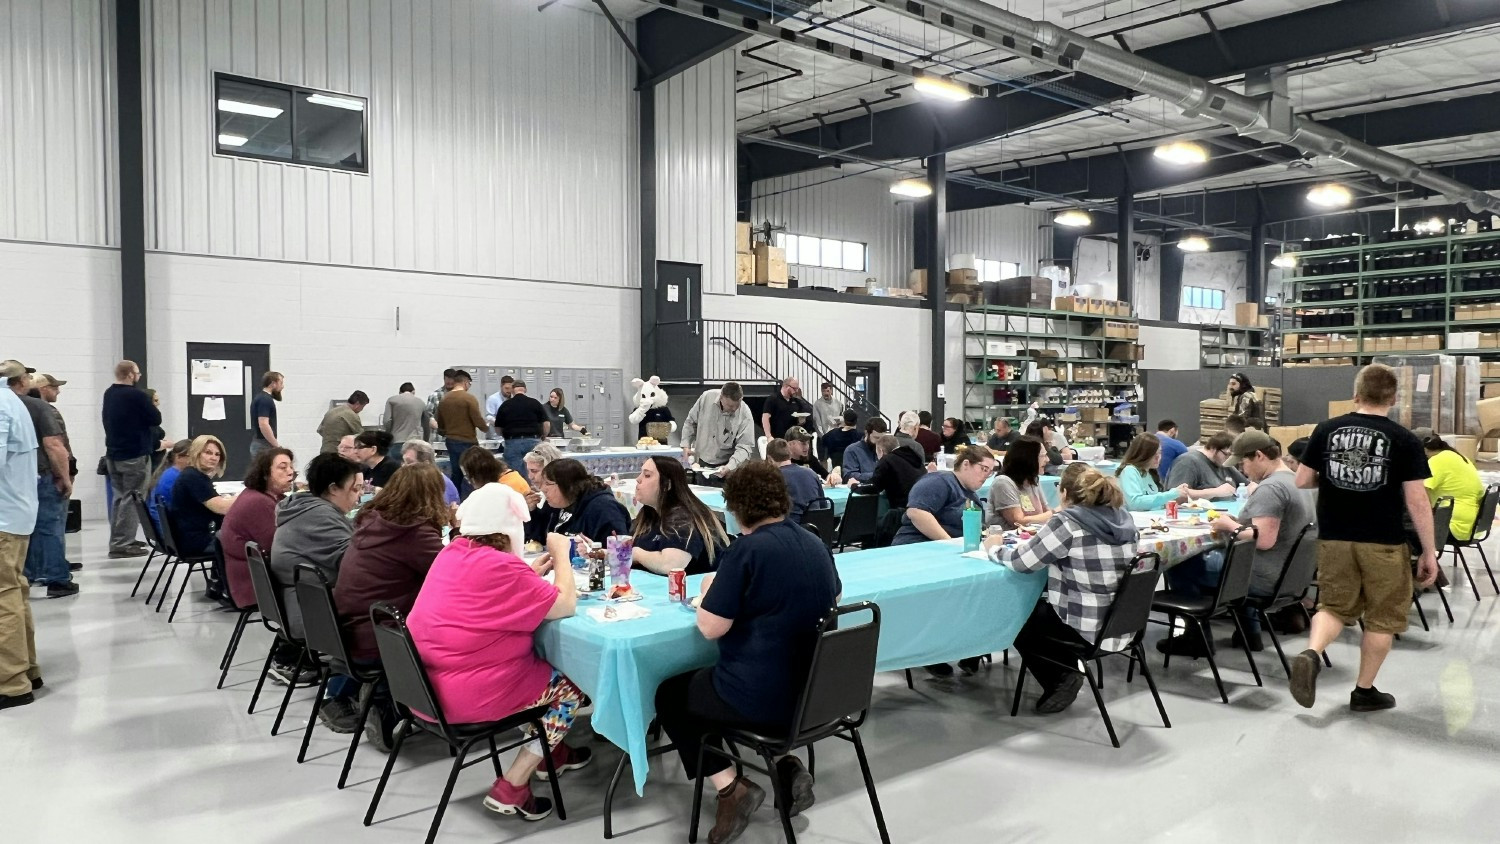 One of our monthly celebrations at our facility where all employees enjoy good food, camaraderie and fun activities. 